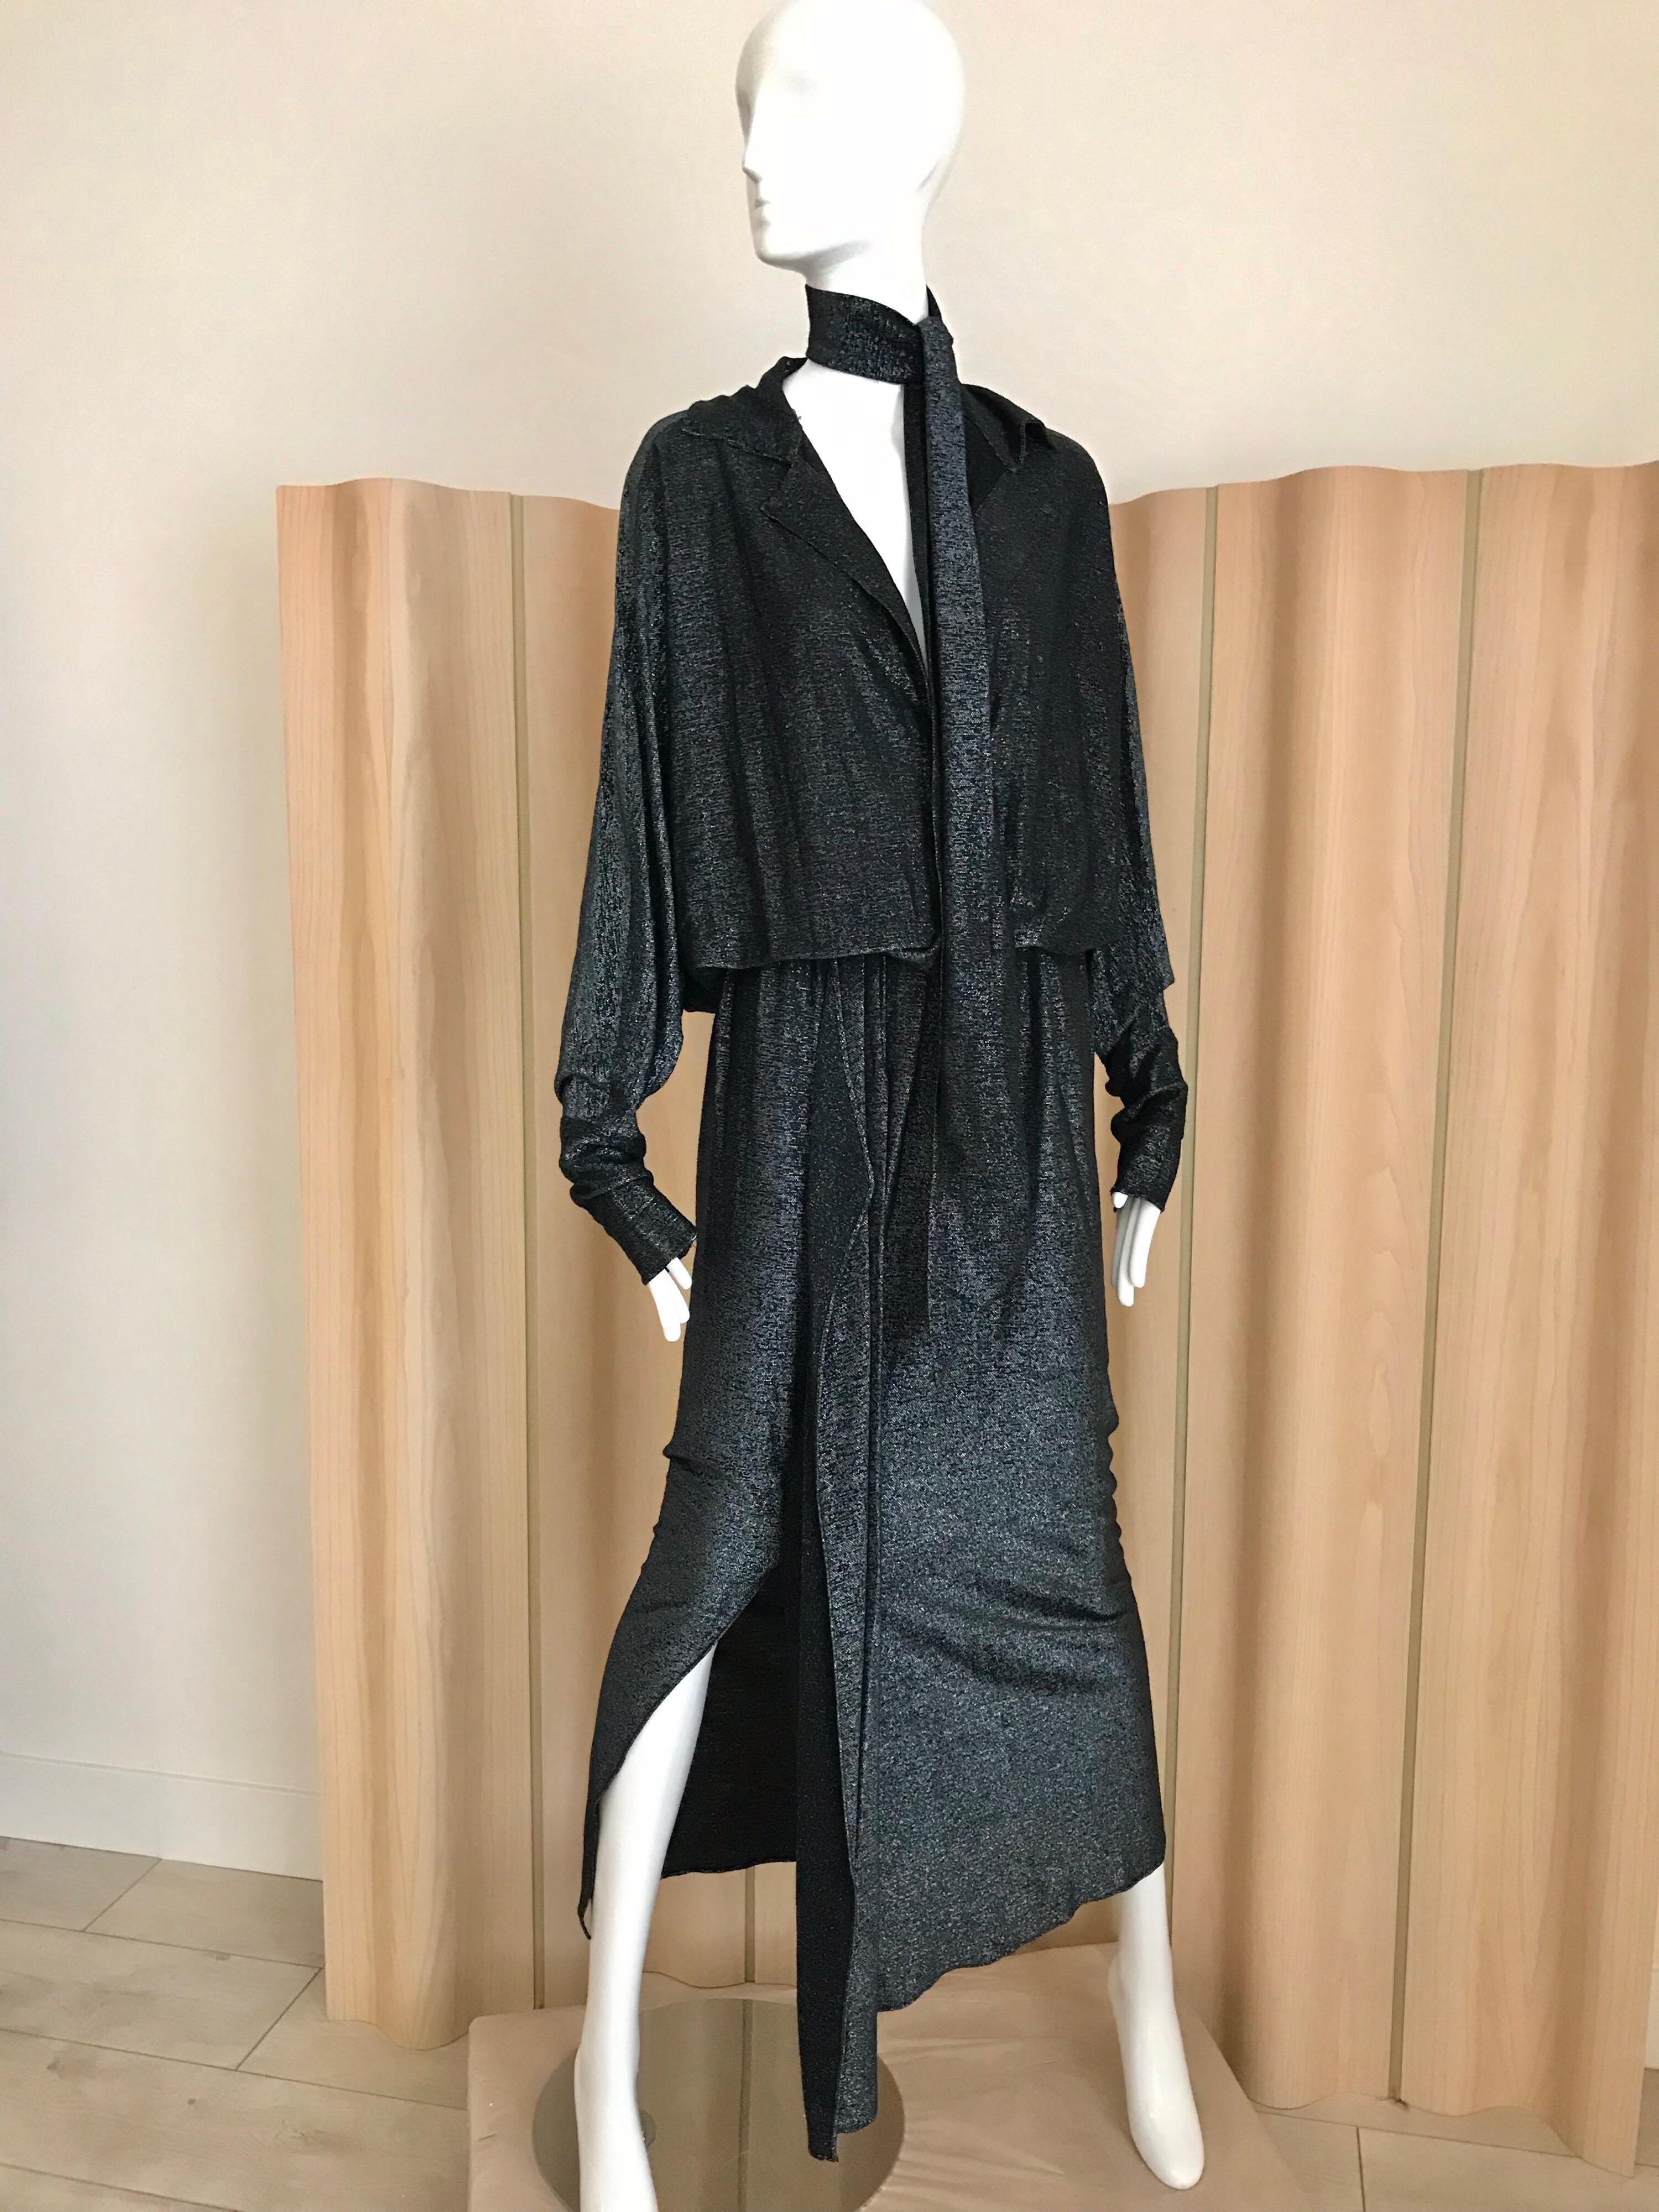 Vintage 1970s Giorgio Di Sant Angelo Black or more gun metal Soft jersey dress with metallic sheen. Batwing sleeves and with elastic waist. Dress can be worn V neck or high neck.  Perfect for Studio 54 party.
Size: 4-6-8